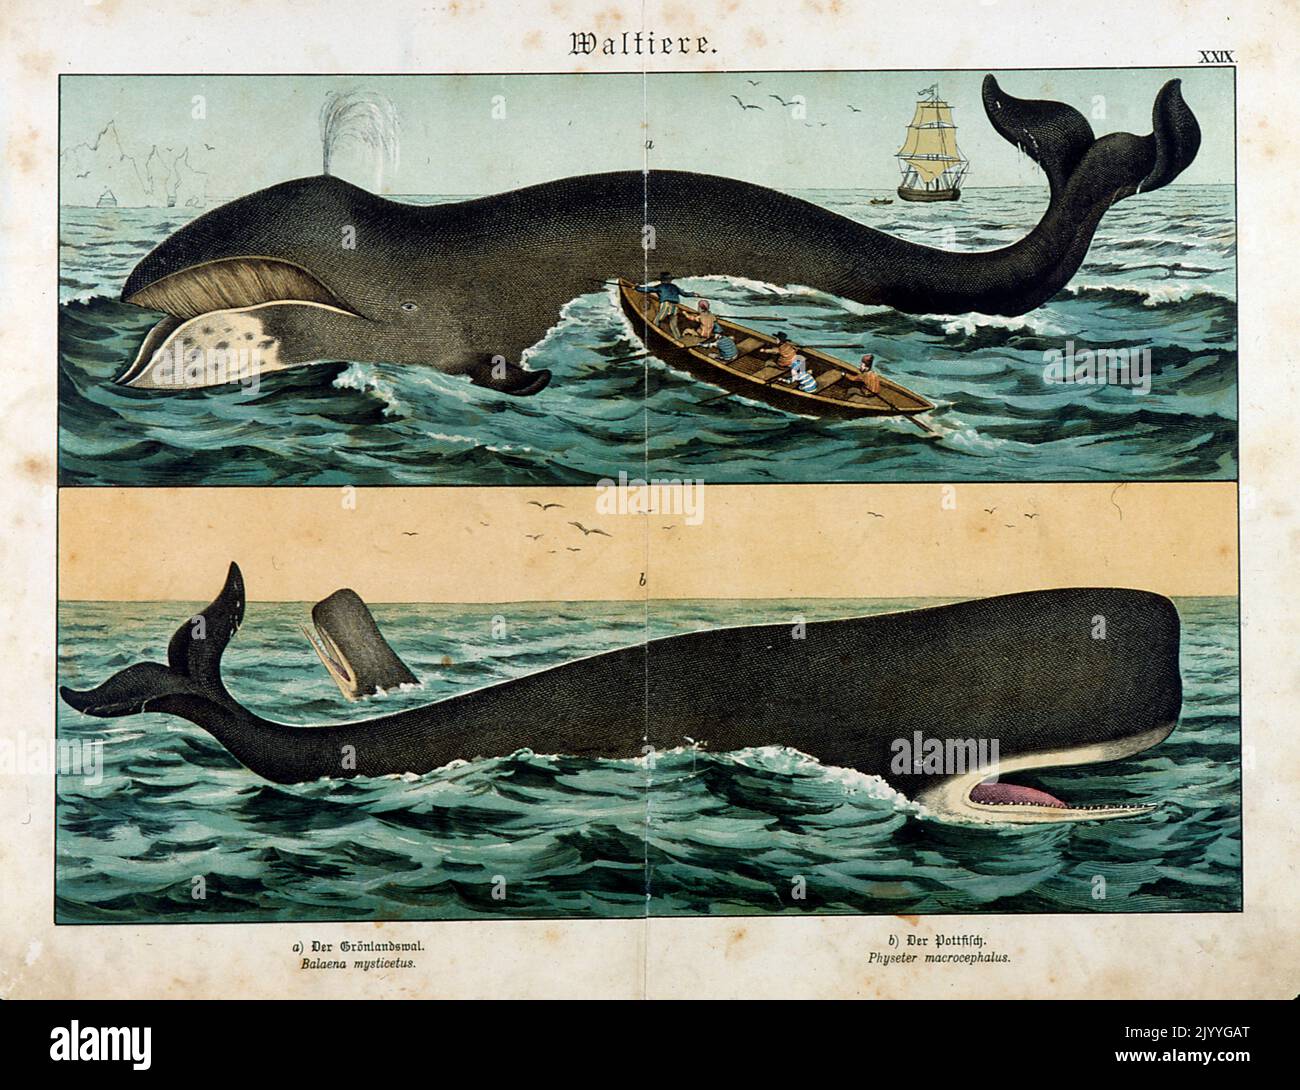 Coloured Illustration depicting two whales in the seas approaching a boat. Stock Photo